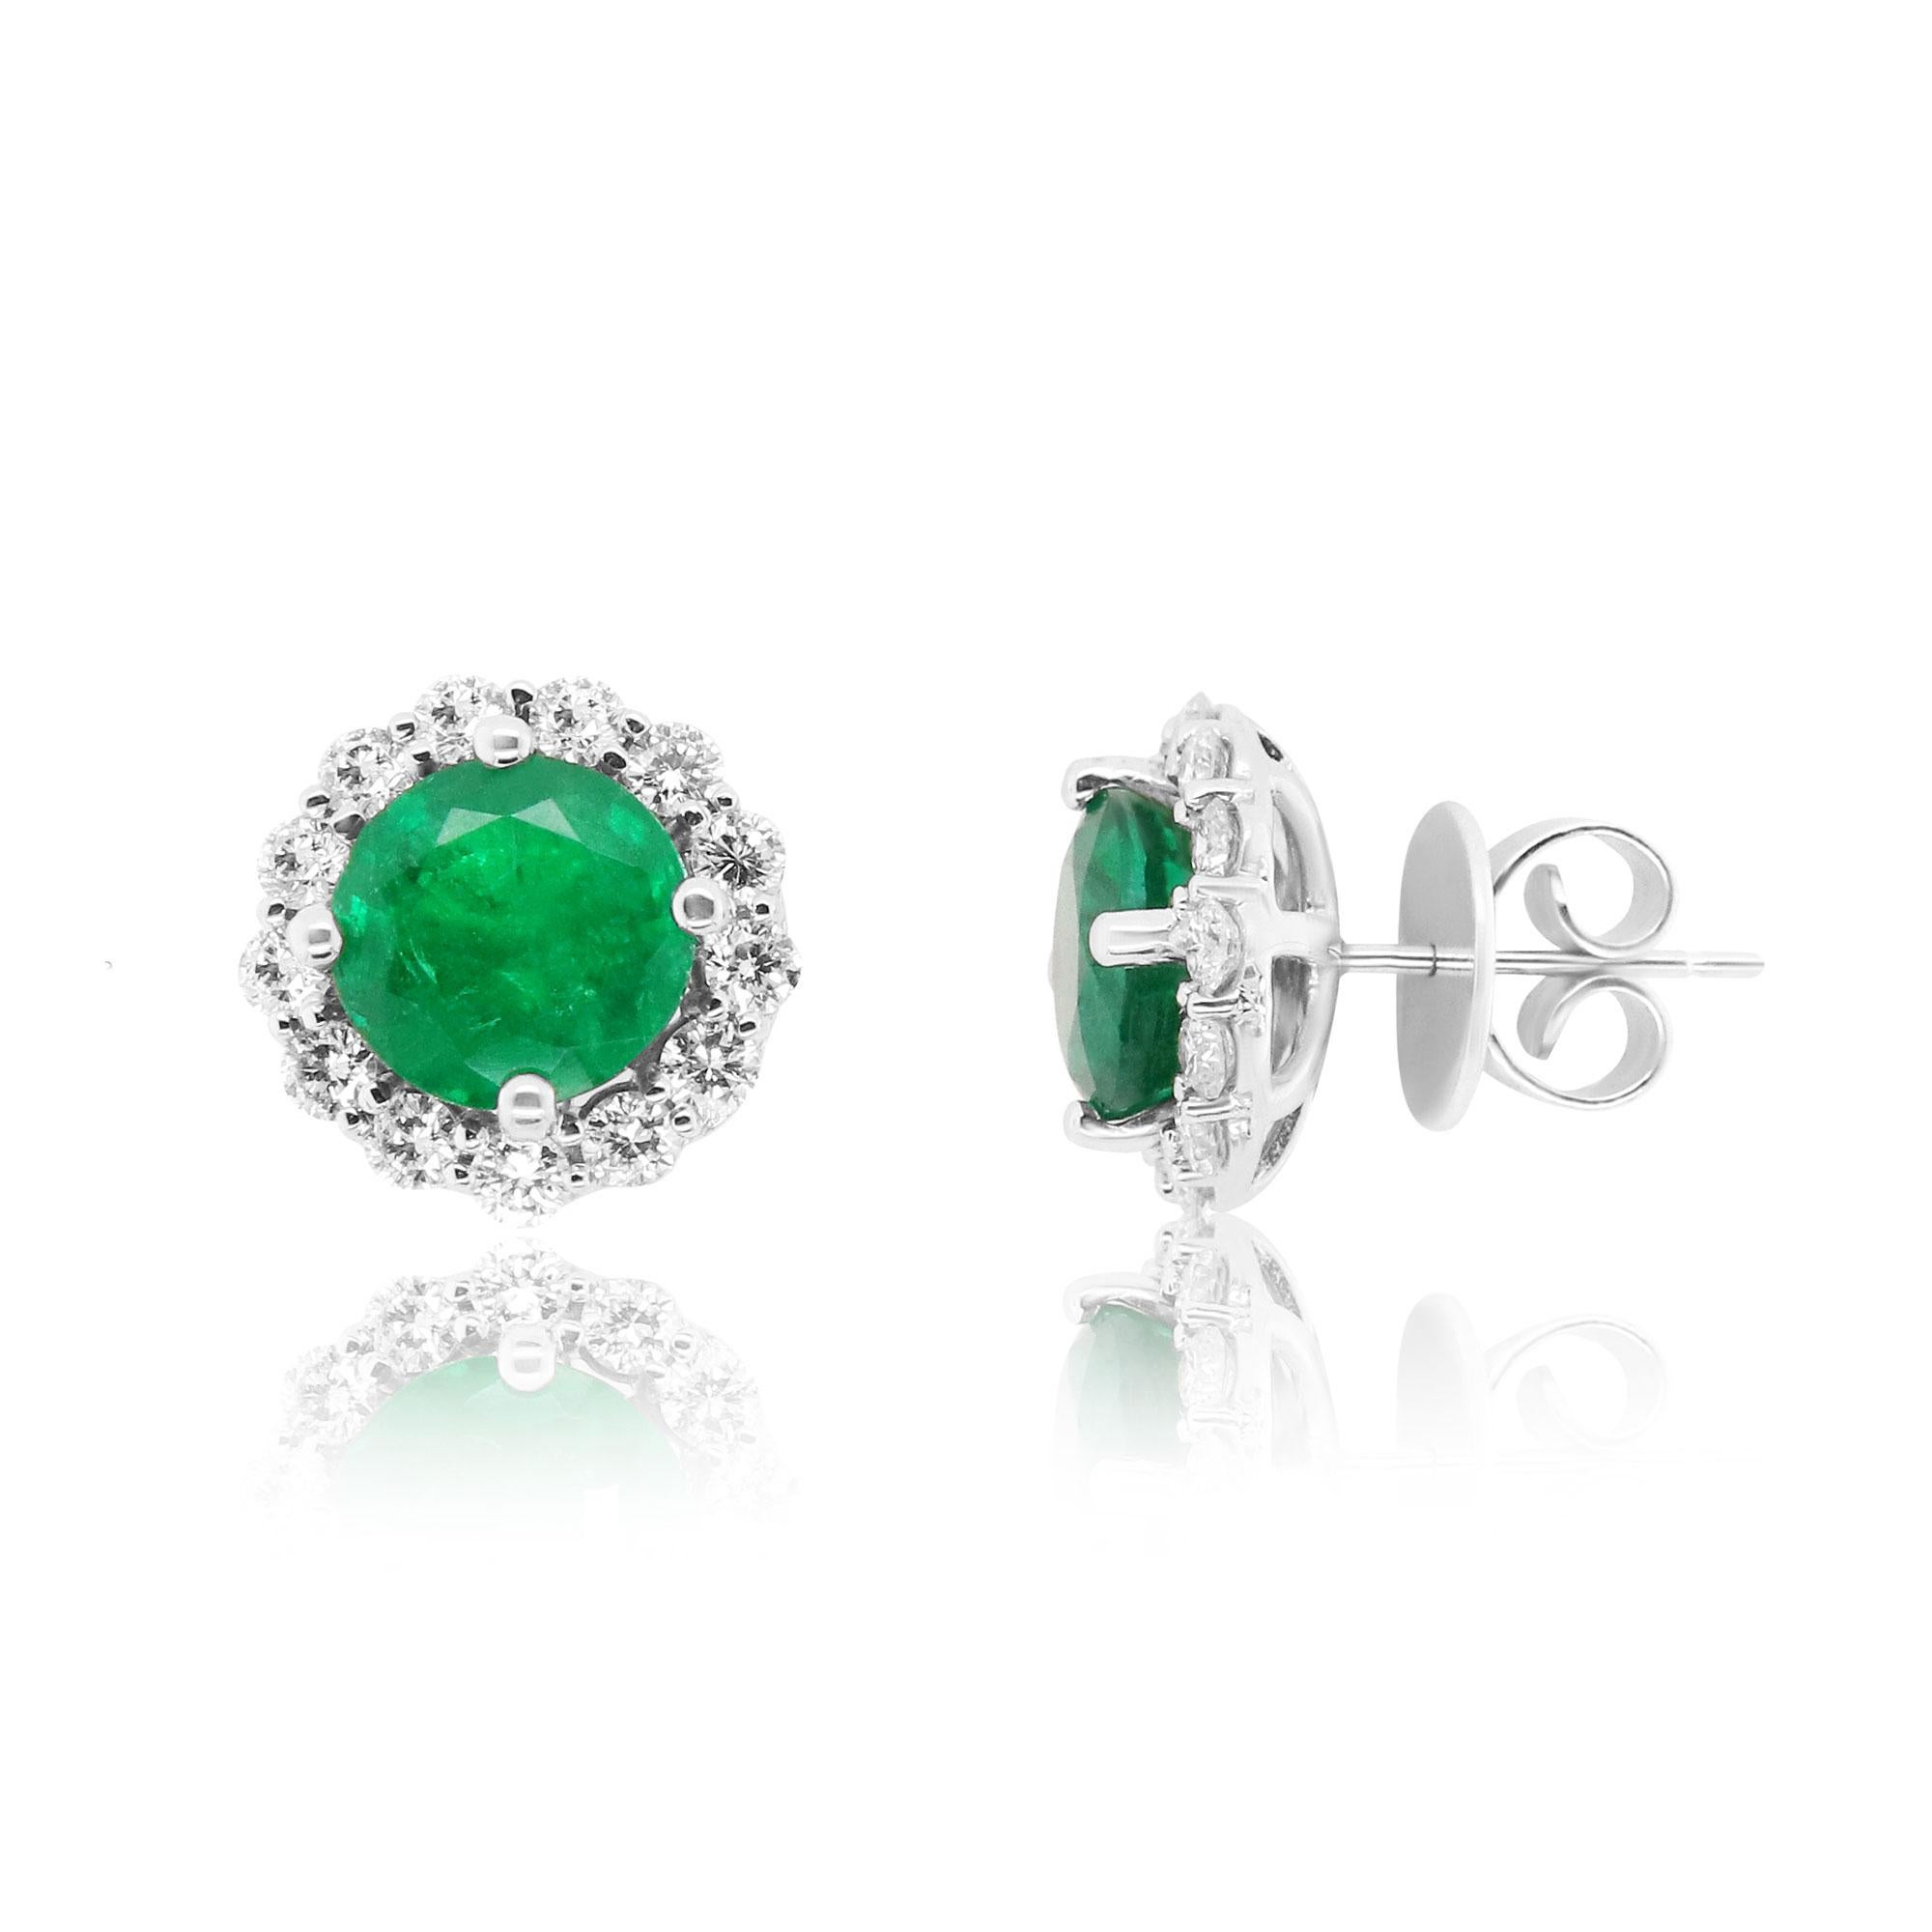 Material: 18k White Gold 
Stone Details: 2 Round Shaped Emeralds at 4.64 Carats Total - Measuring 8.6 mm
Diamond Details: 26 Brilliant Round White Diamonds at 1.37 Carats. Clarity: SI / Color: H-I

Fine one-of-a-kind craftsmanship meets incredible